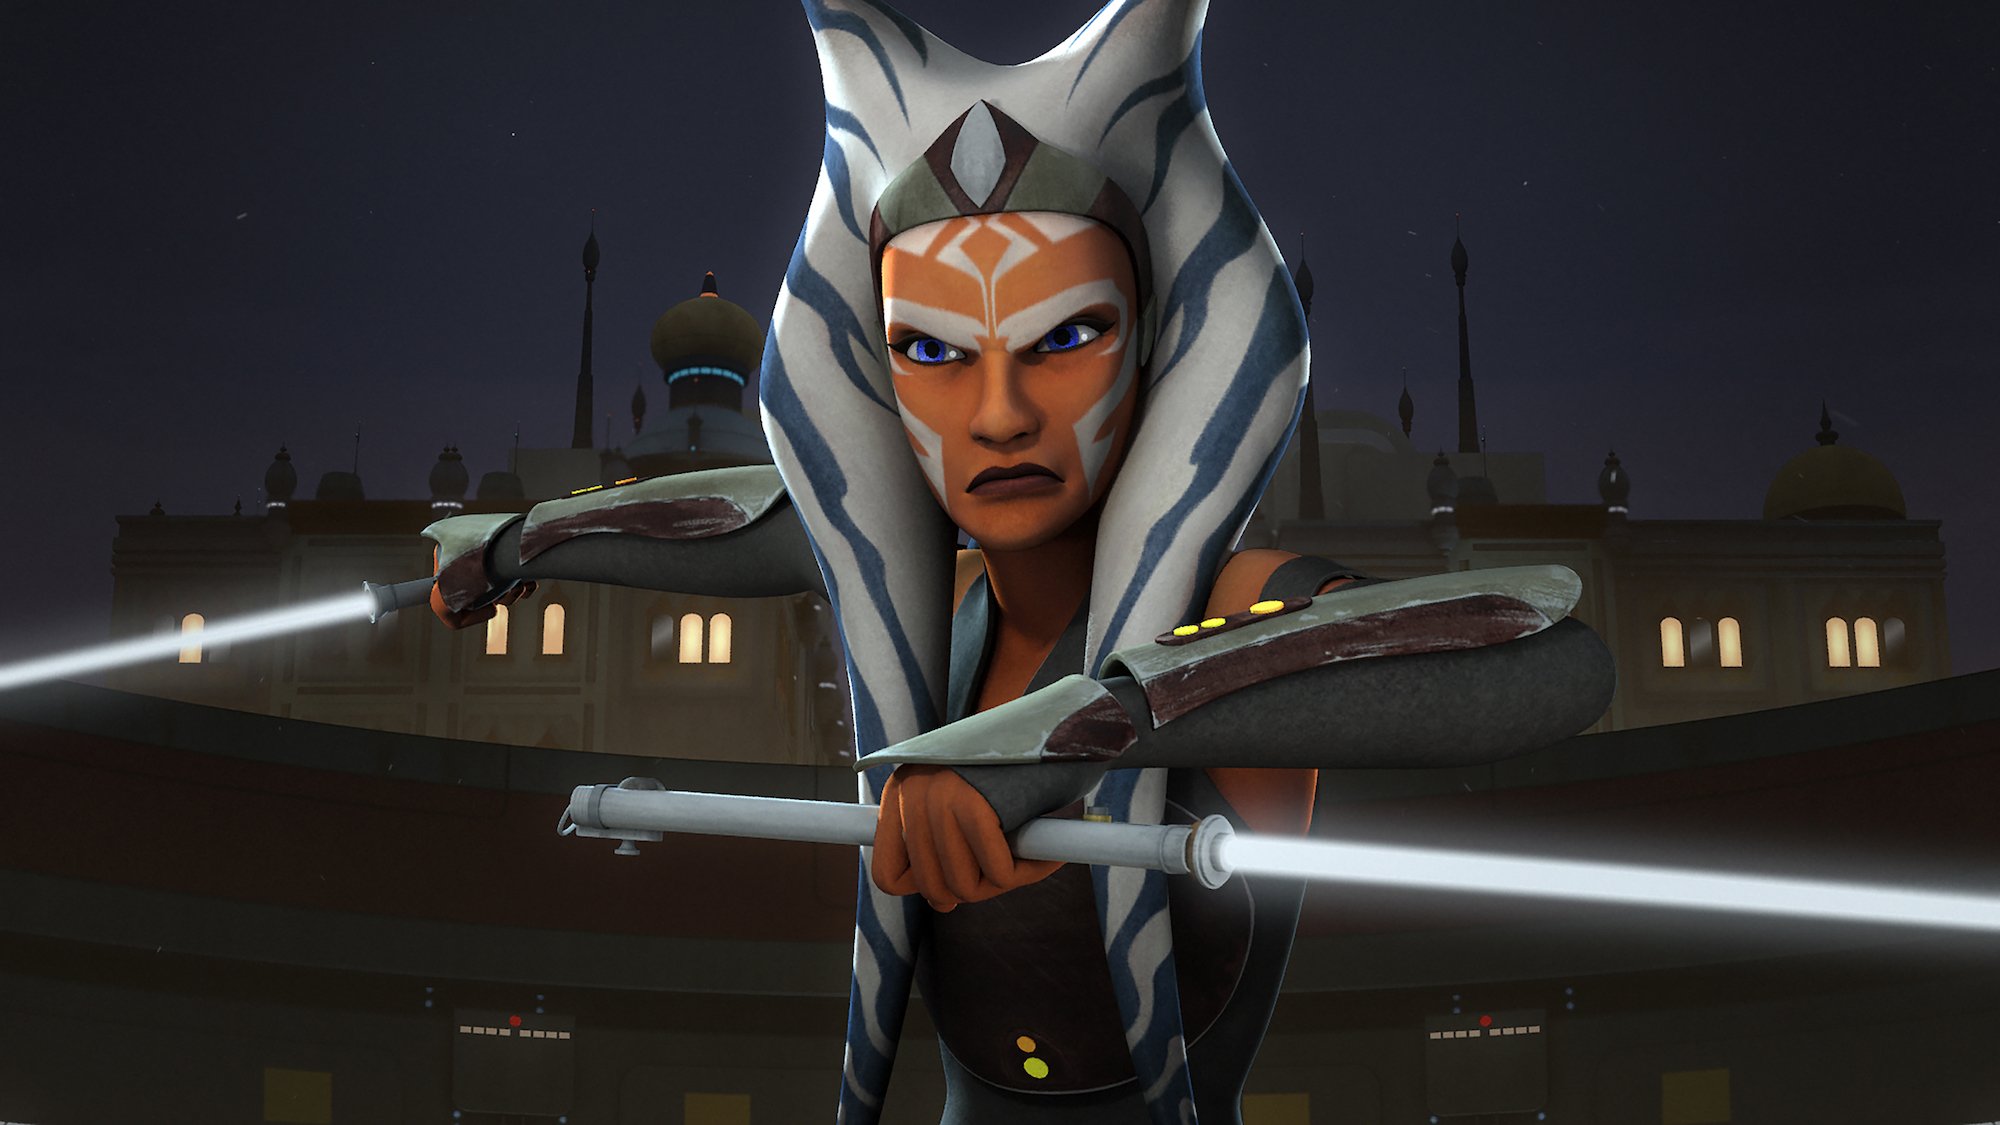 Ahsoka Tano with her white lightsabers in 'STAR WARS REBELS'